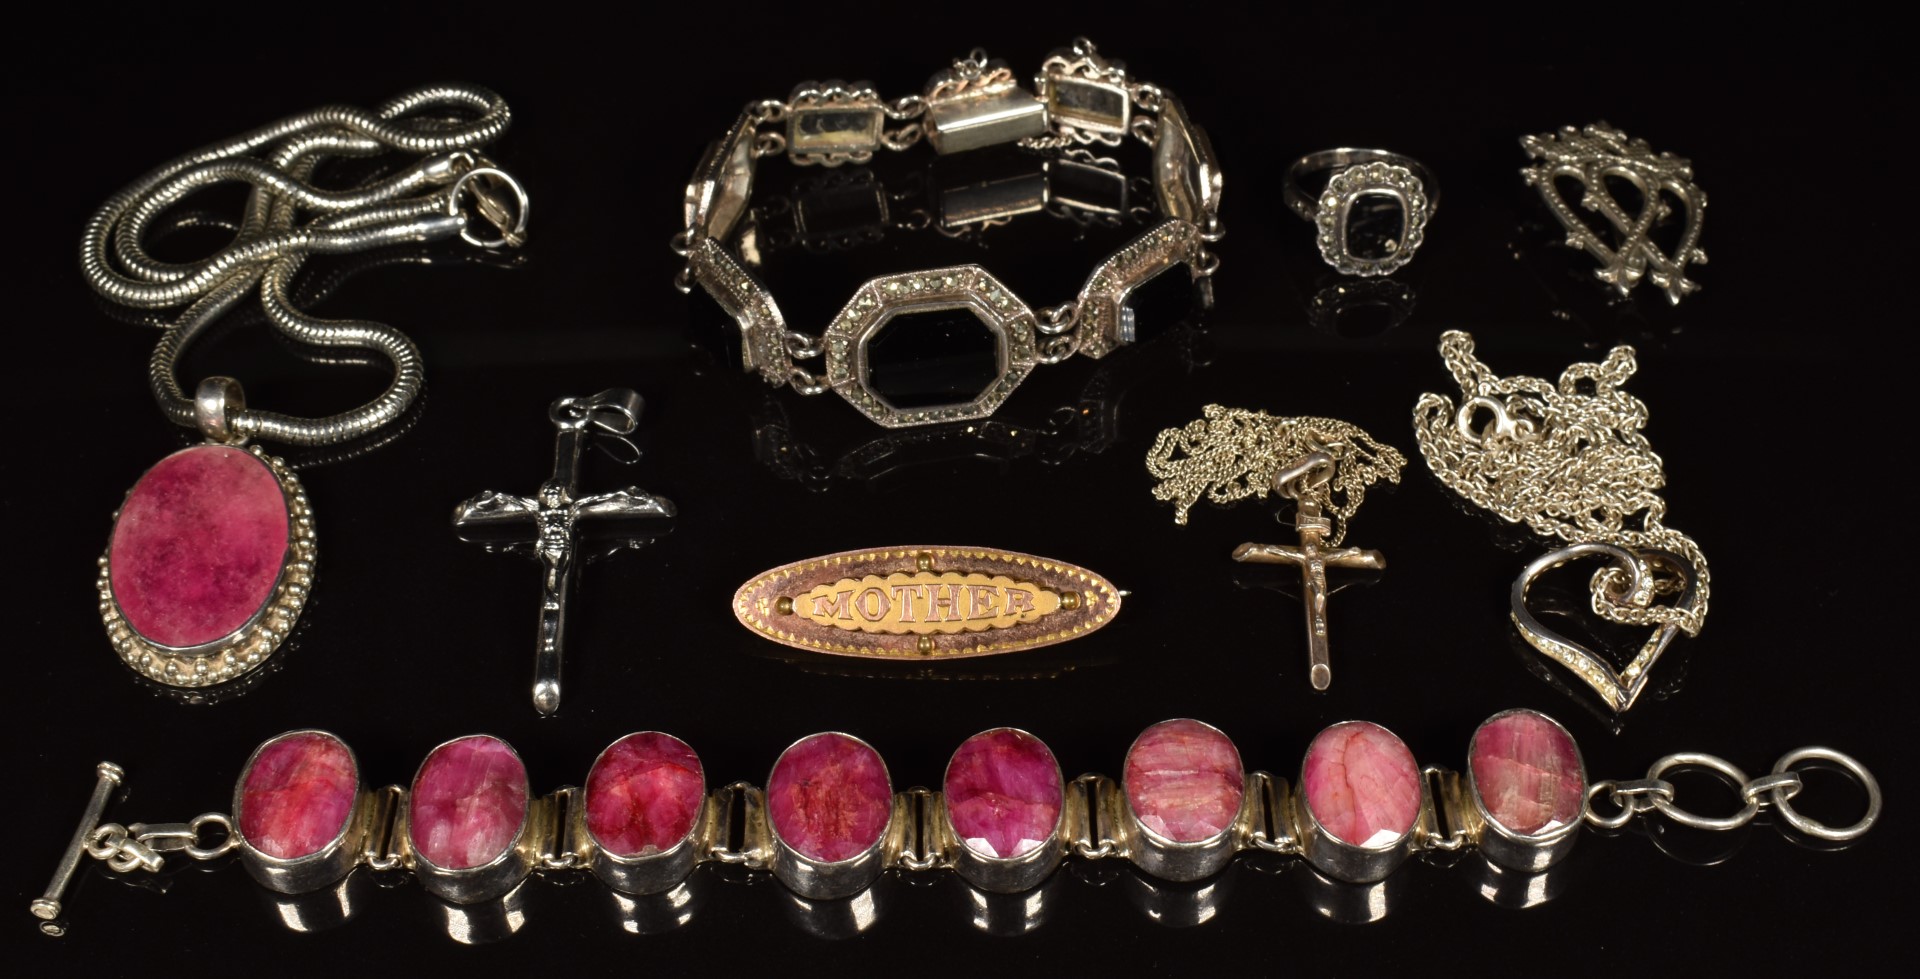 A silver bracelet set with rubies, a silver bracelet set with onyx, silver pendants and chains,